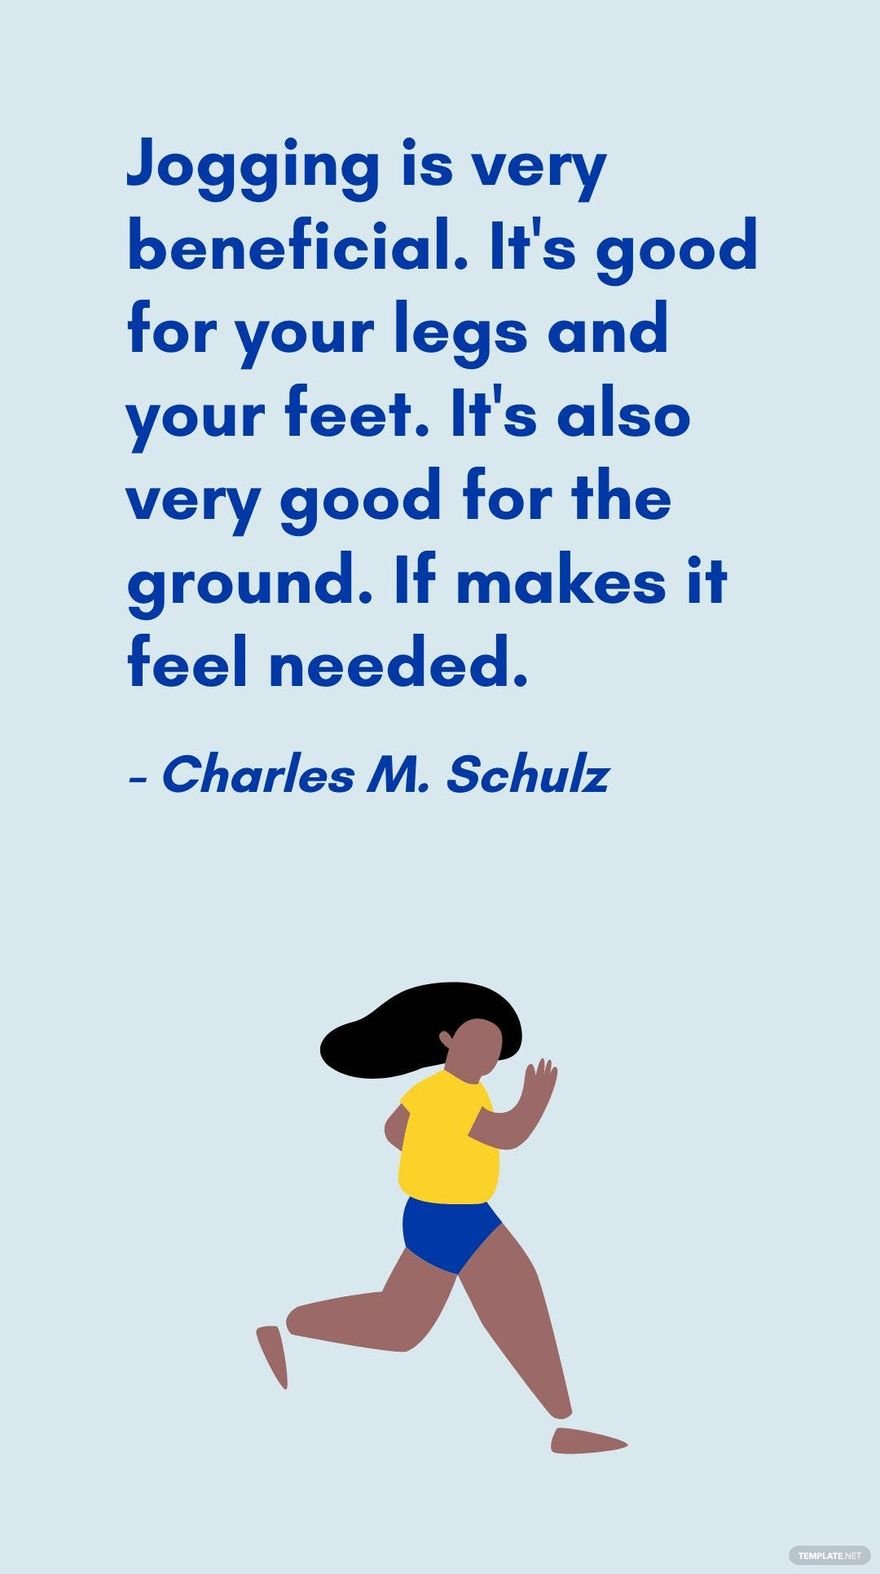 Charles M. Schulz - Jogging is very beneficial. It's good for your legs and your feet. It's also very good for the ground. If makes it feel needed.